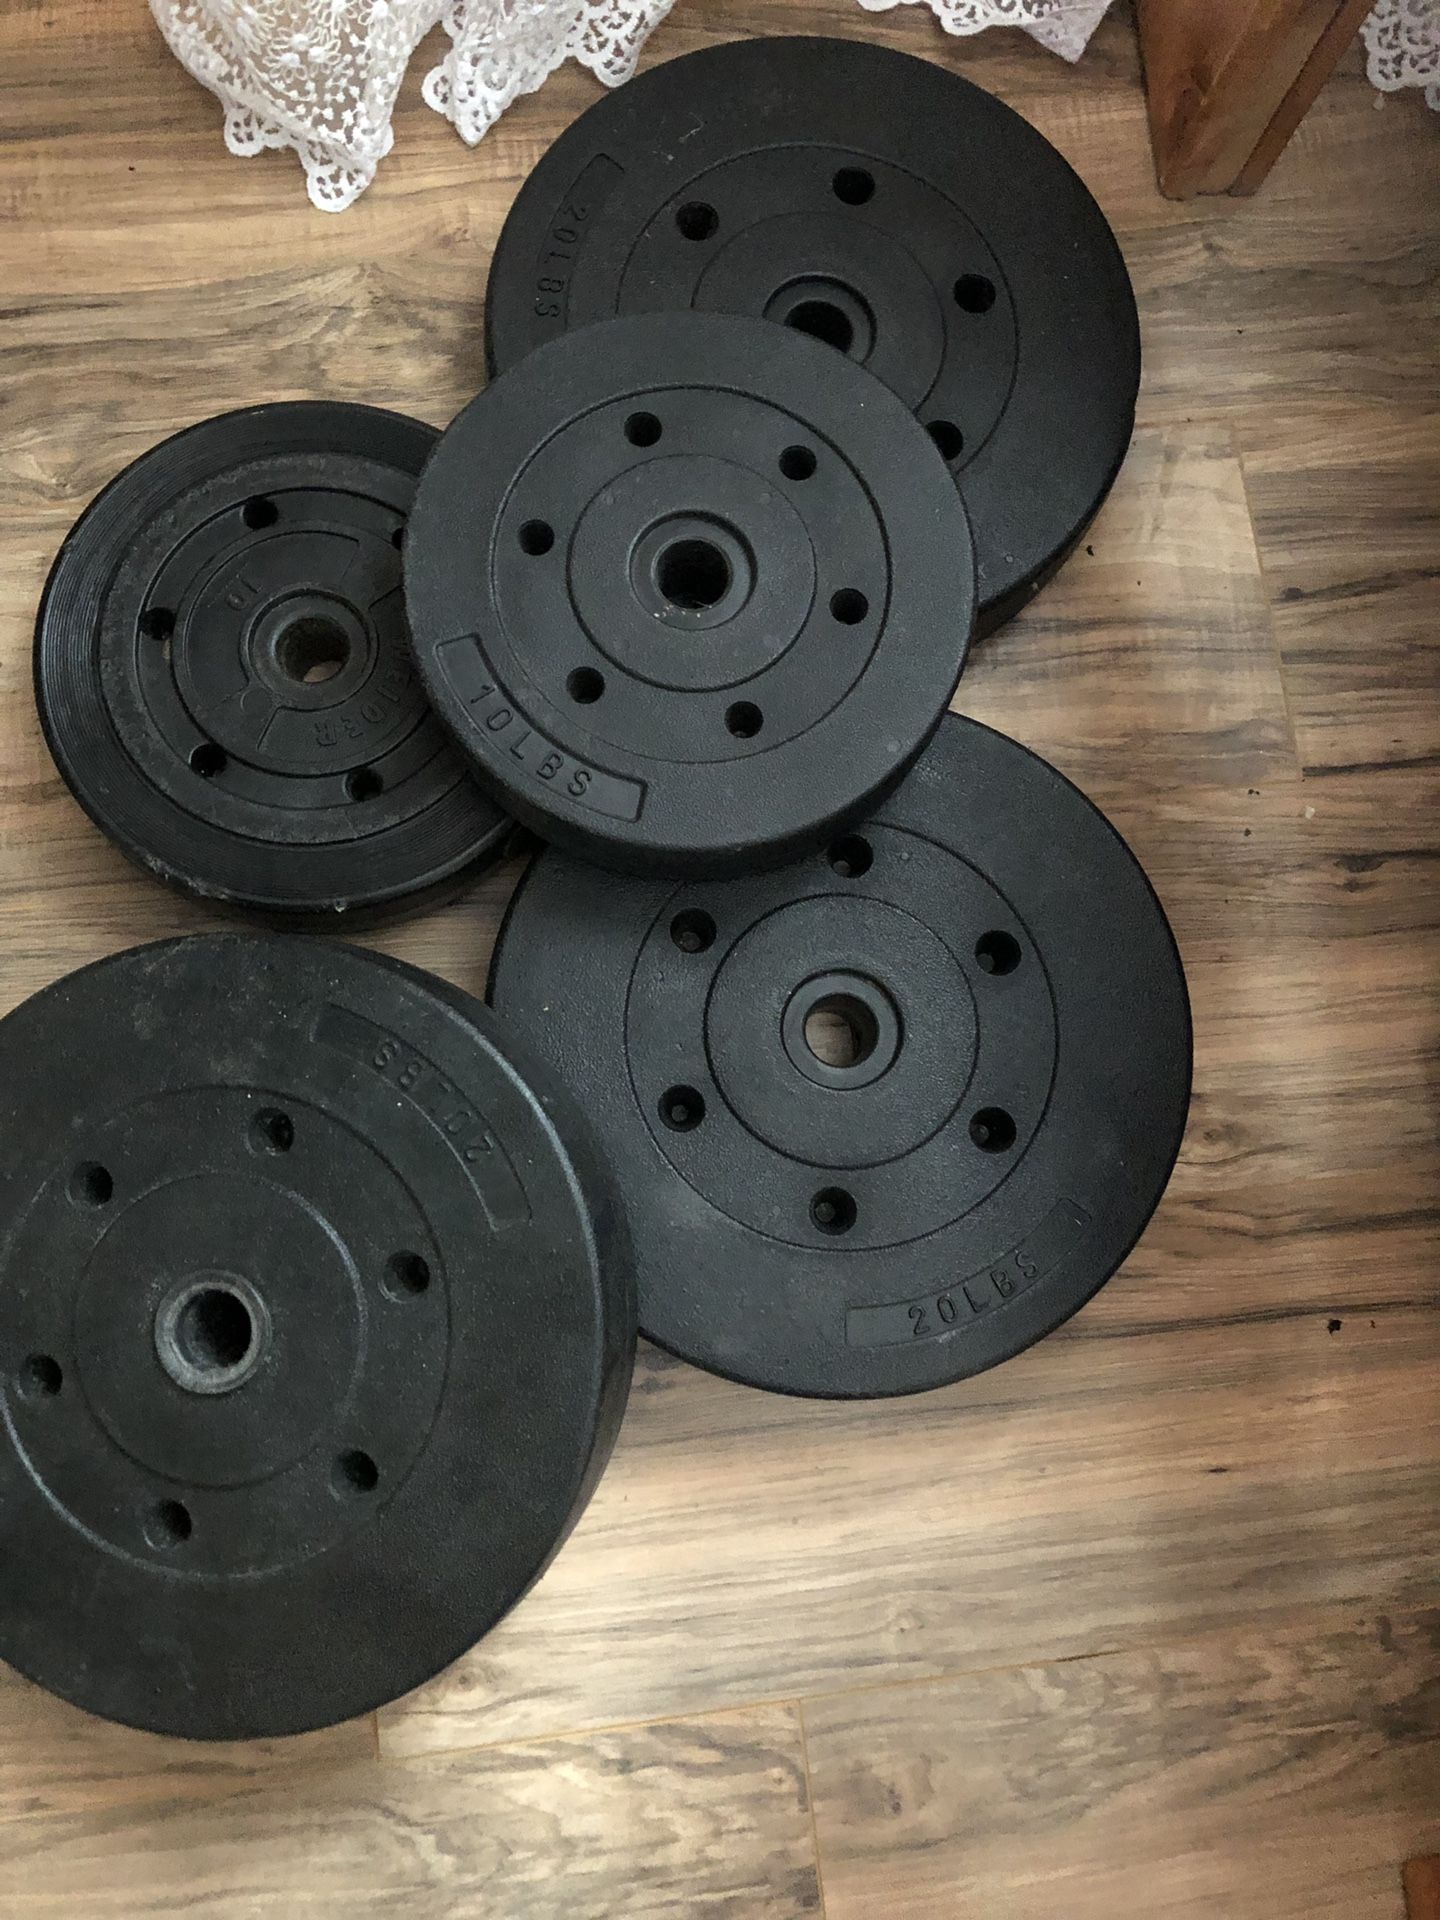 New Weights for lifting